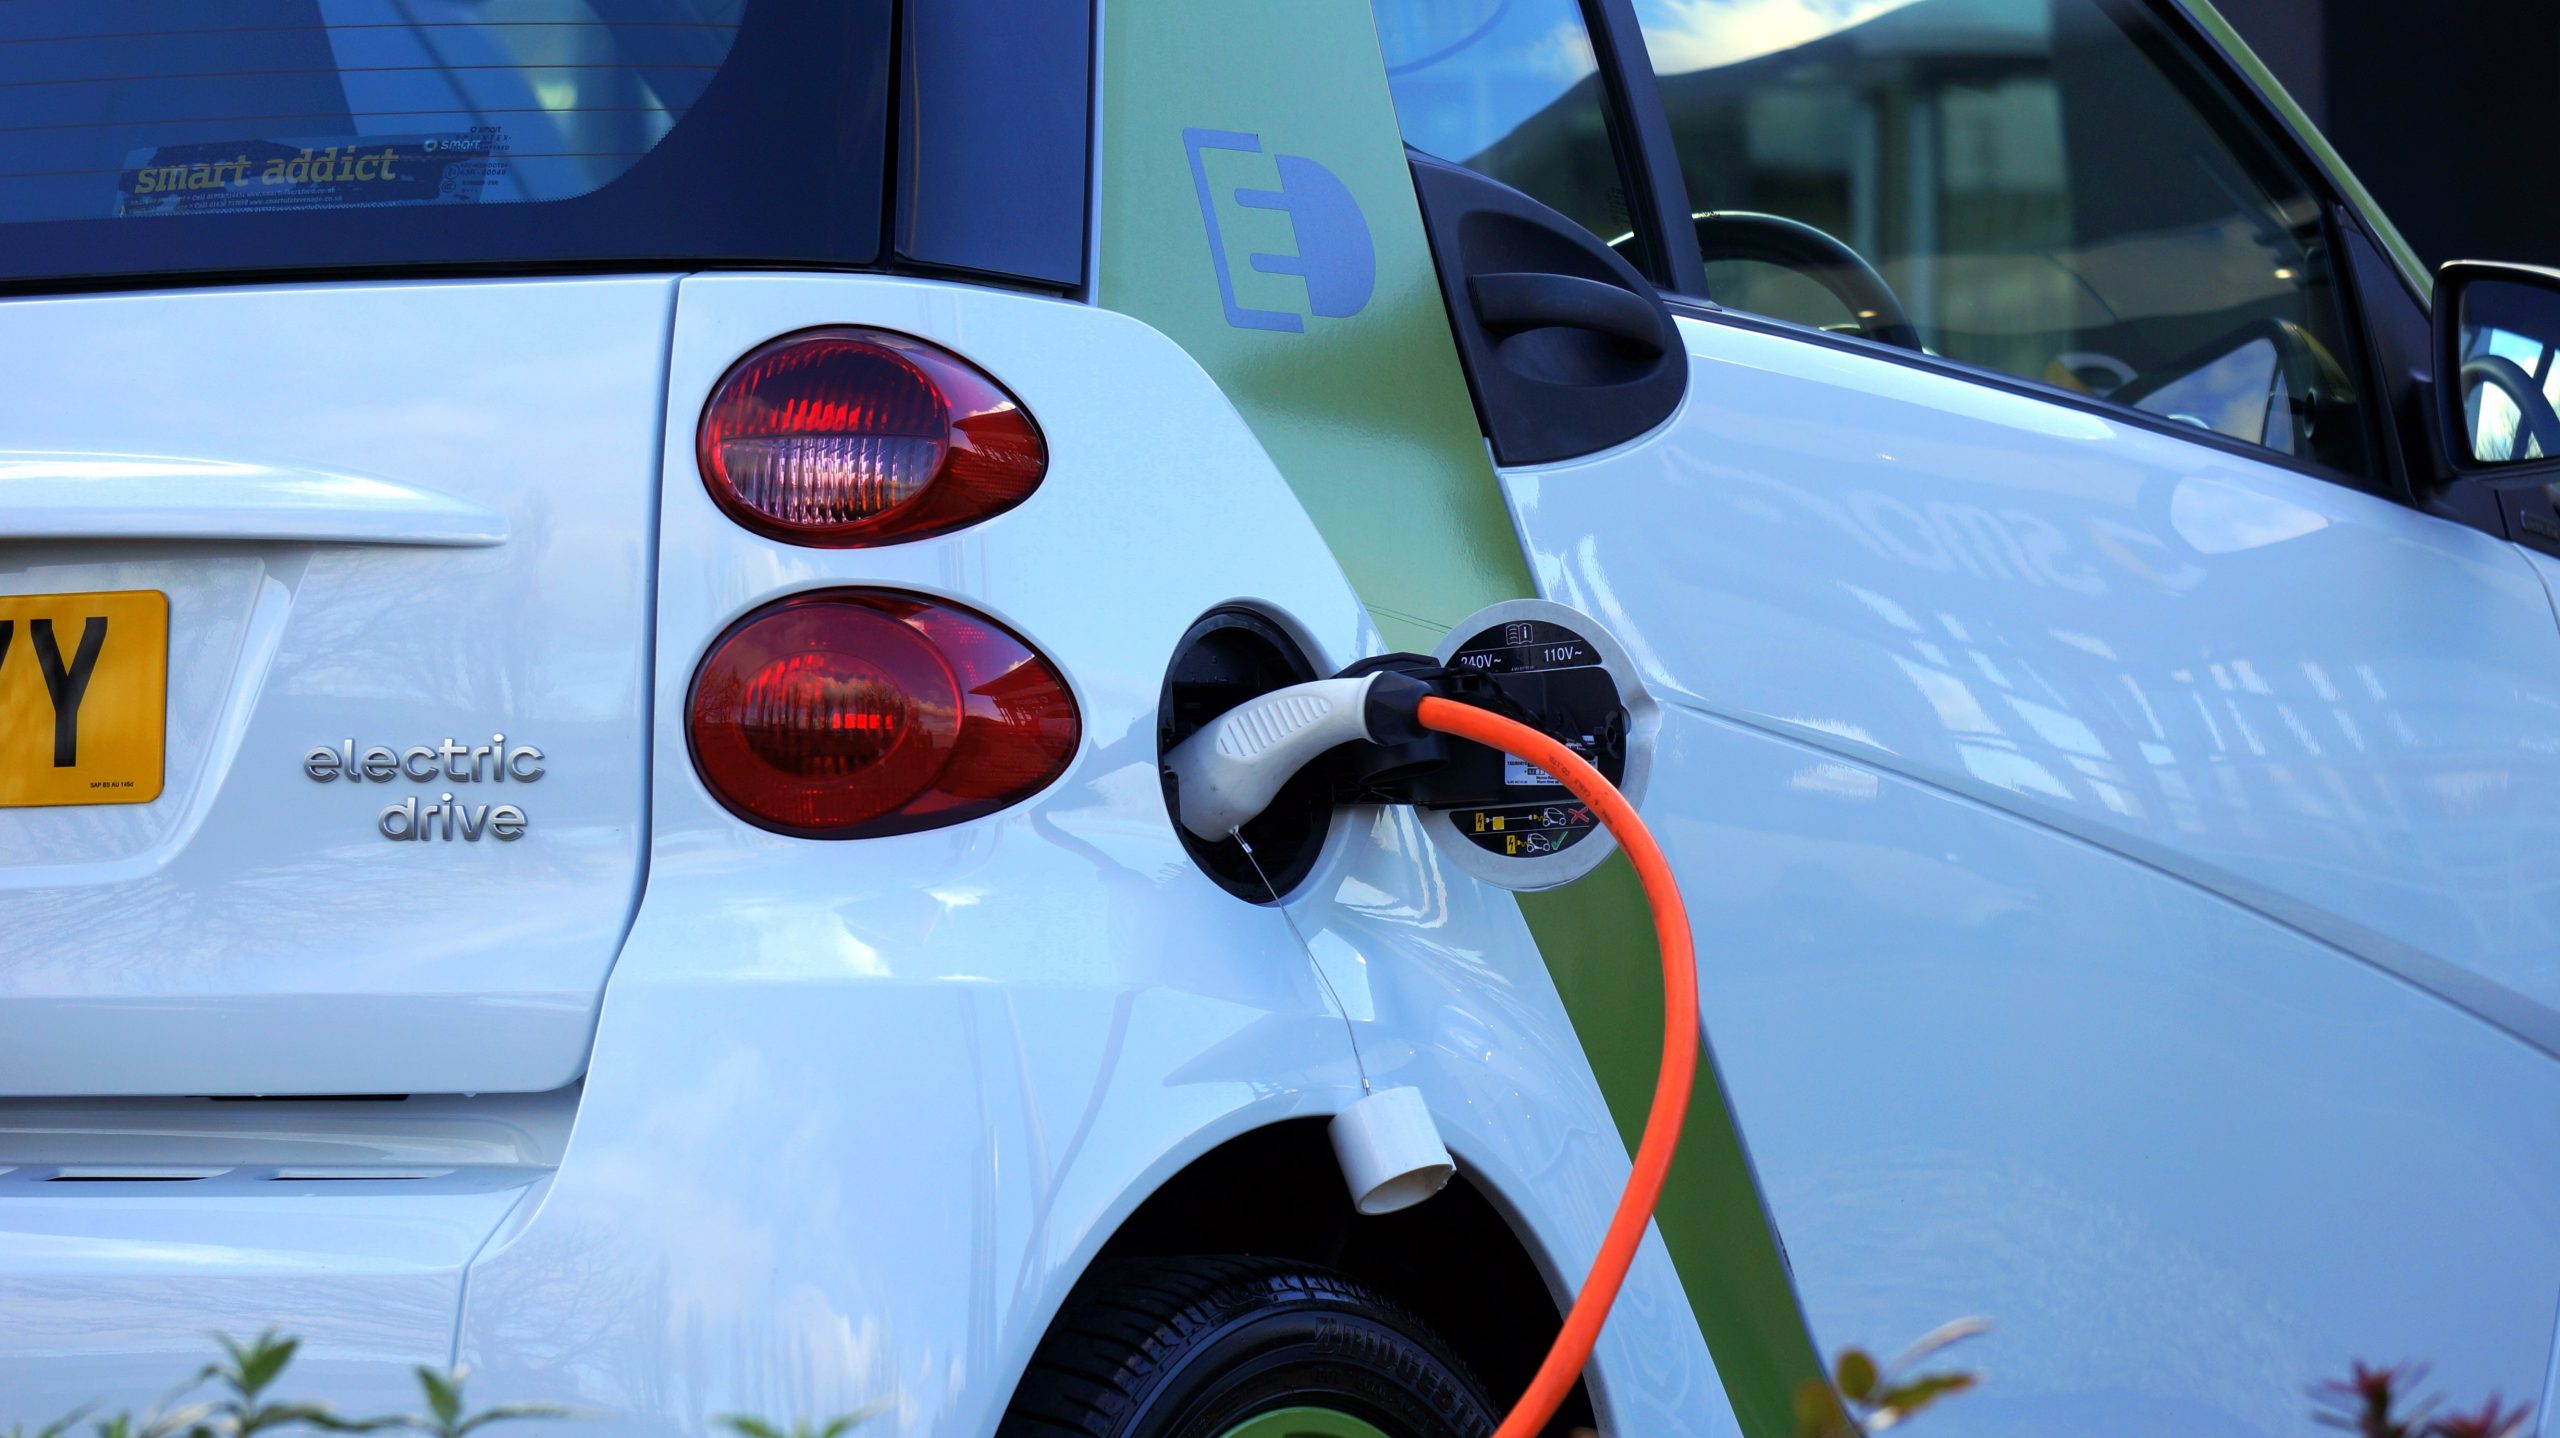 Poland’s Electromobility Industry Is Expected To Flourish In The Future, According To New Report